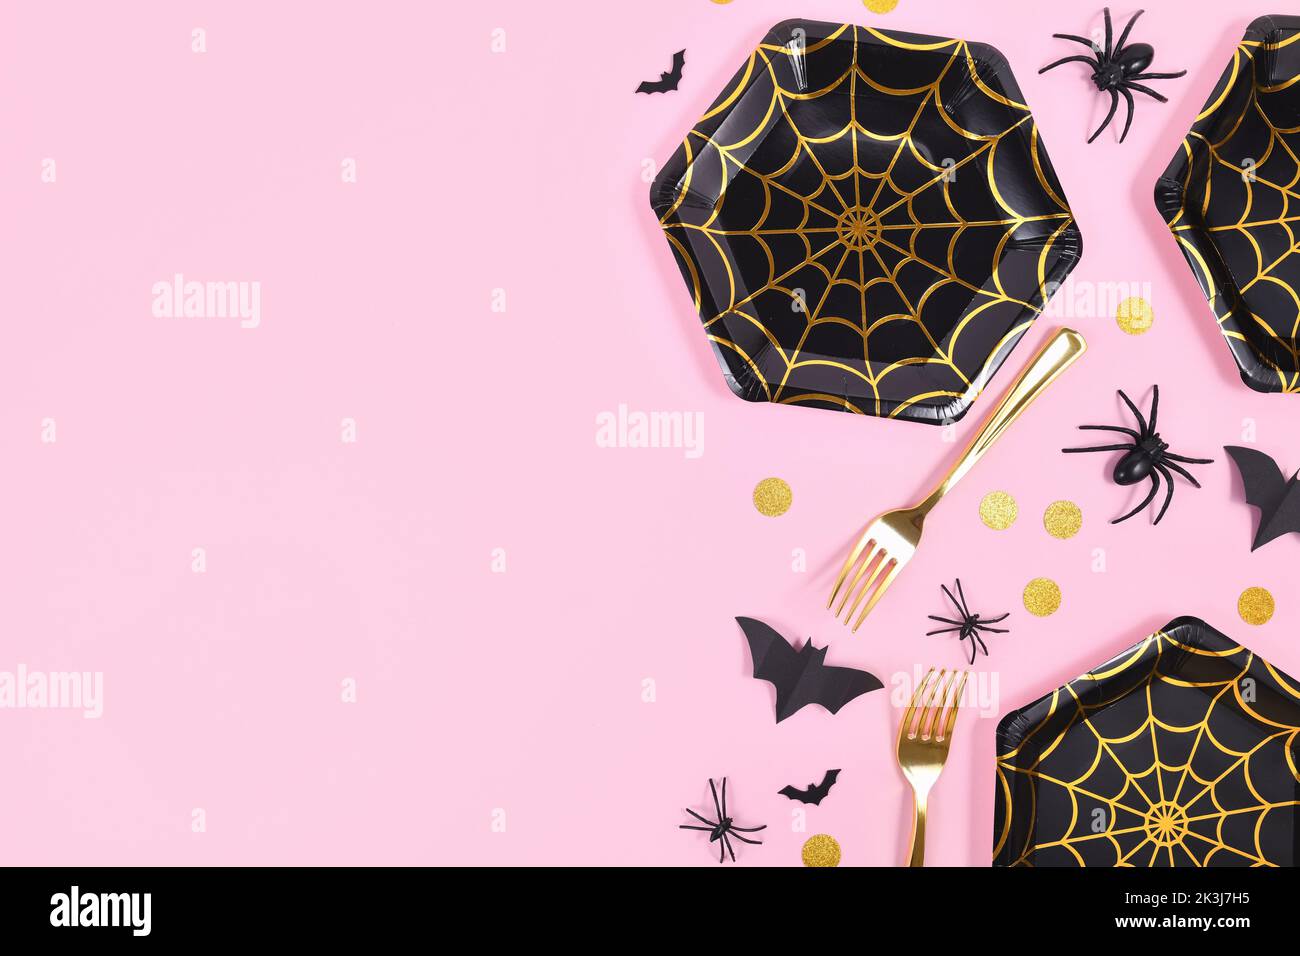 Halloween party flat lay with black and gold spider web plates, spiders and confetti on pink background Stock Photo